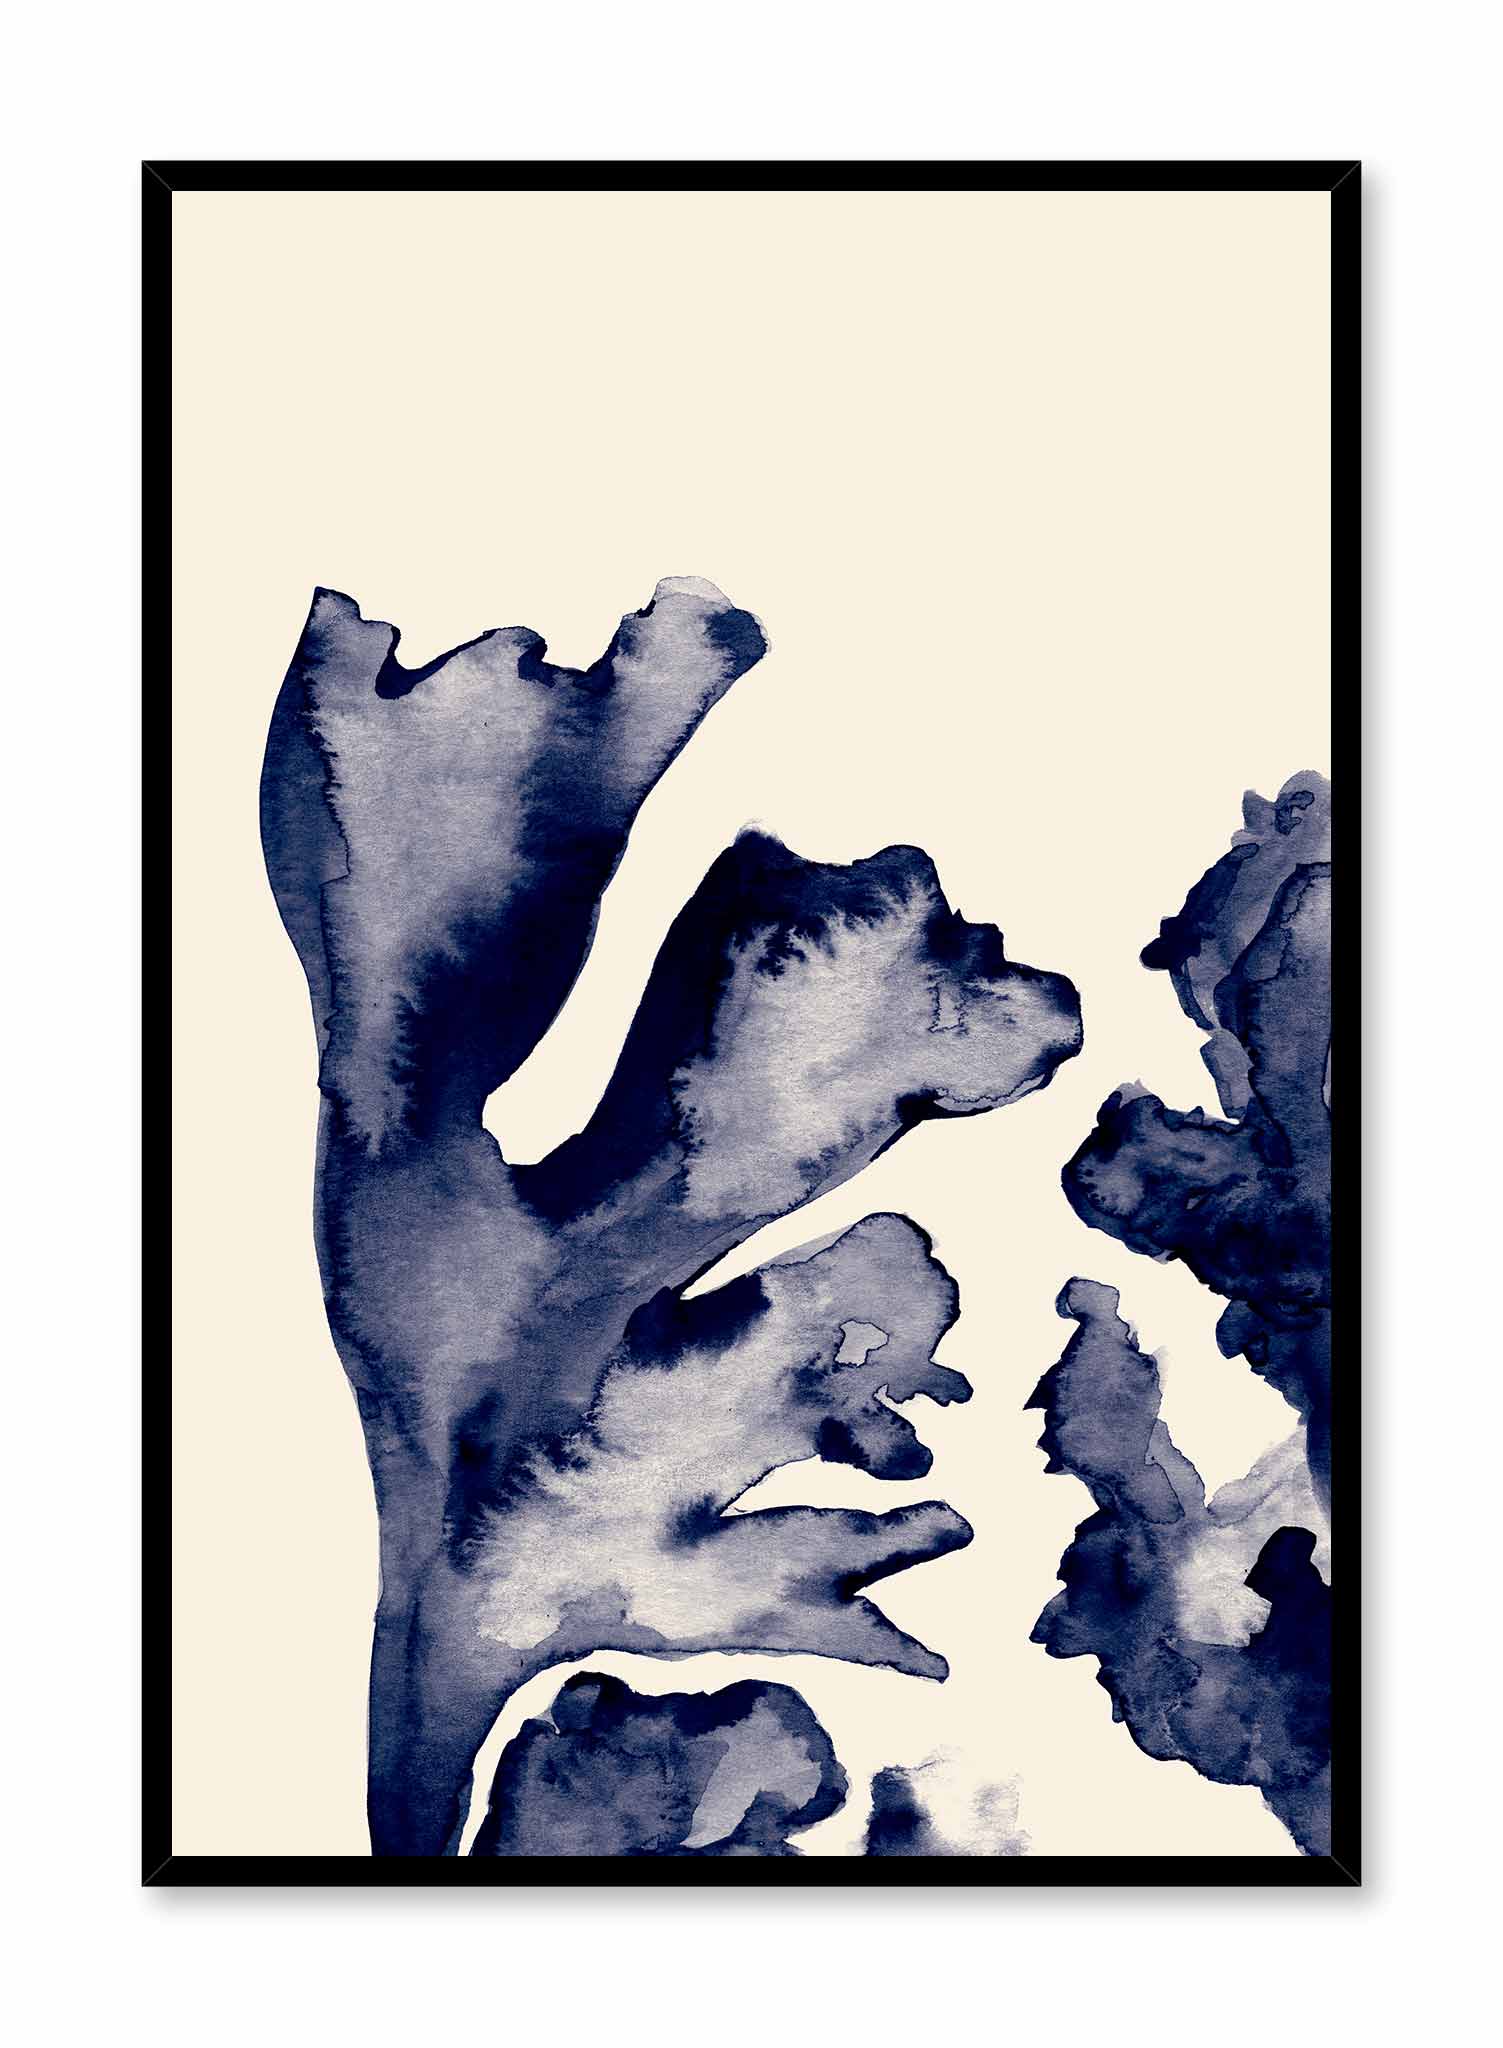 Watercolour Reef' is a minimalist illustration by Opposite Wall of a close-up shot of two coral reef tentacles.